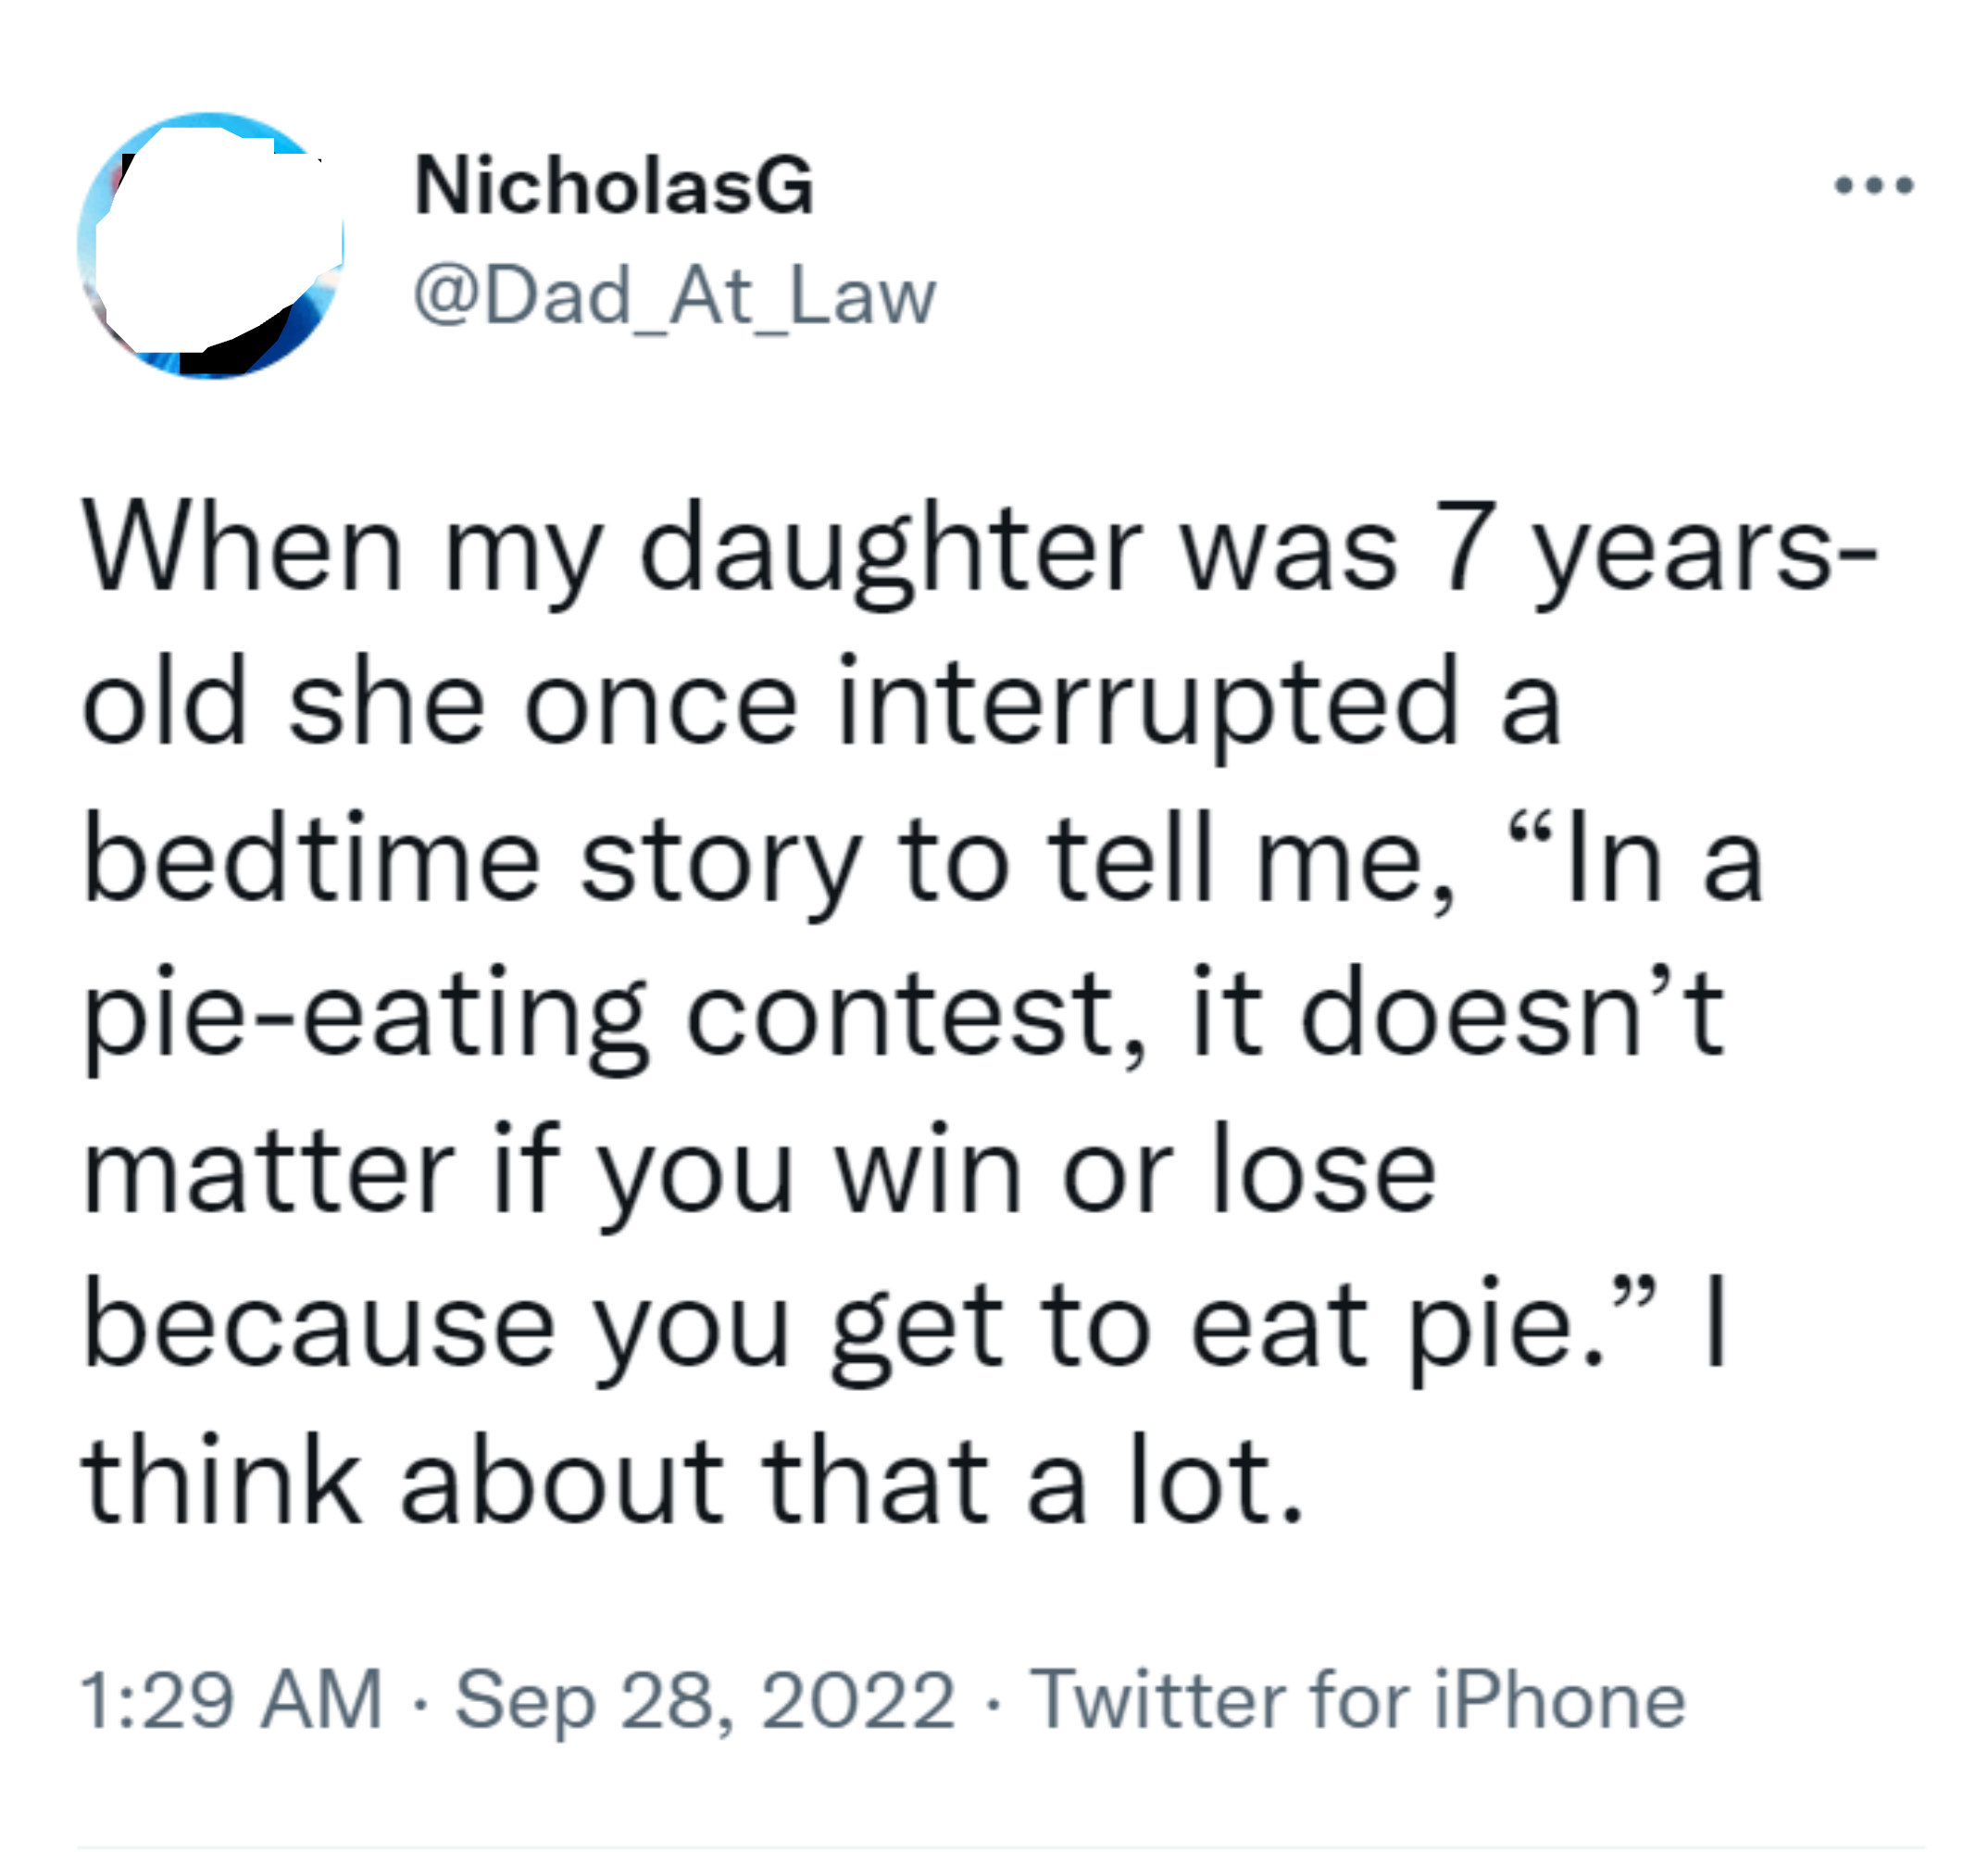 7-year-old interrupts a bedtime story to say &quot;In a pie-eating contest, it doesn&#x27;t matter if you win or lose because you get to eat pie&quot;